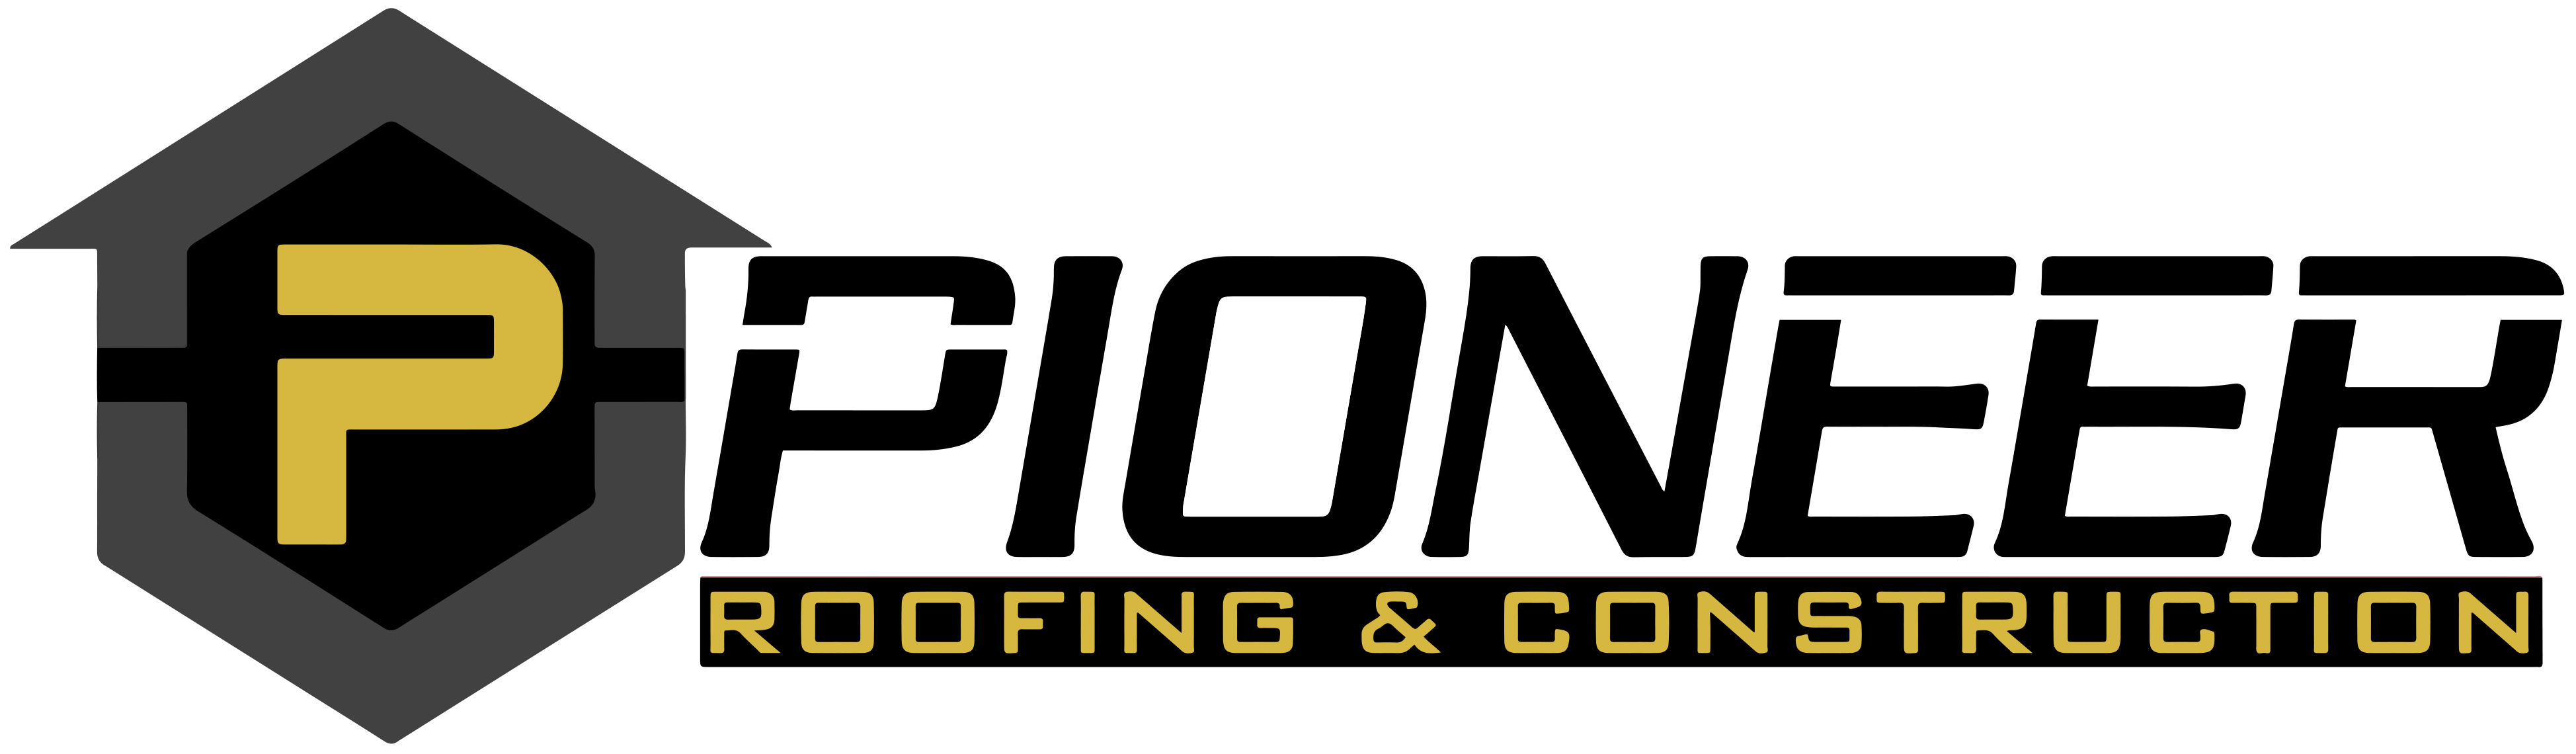 Pioneer Roofing & Construction Logo